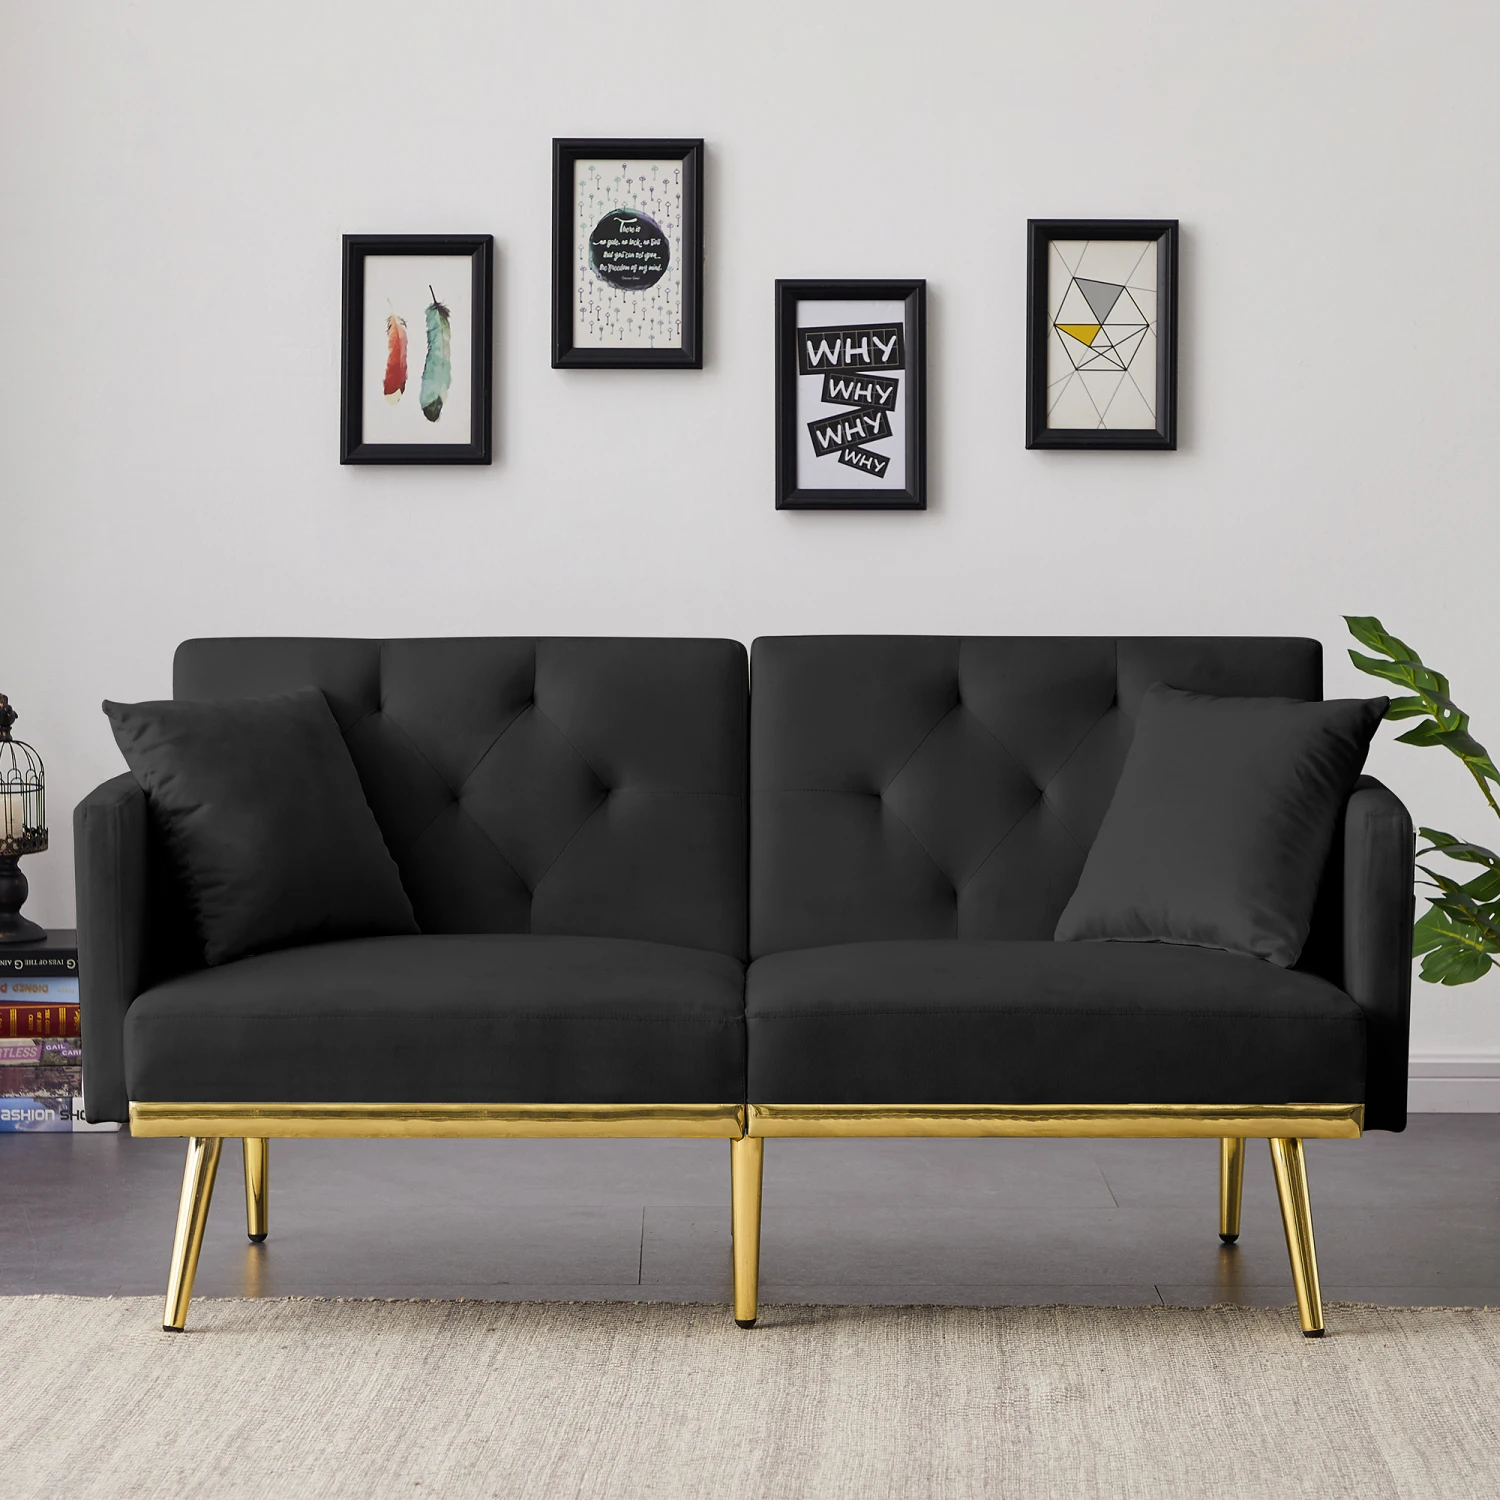 

Elegant Black Velvet Sofa Bed Perfect for Modern Living Rooms and Small Spaces - Comfortable and Stylish Furniture Piece with Ve